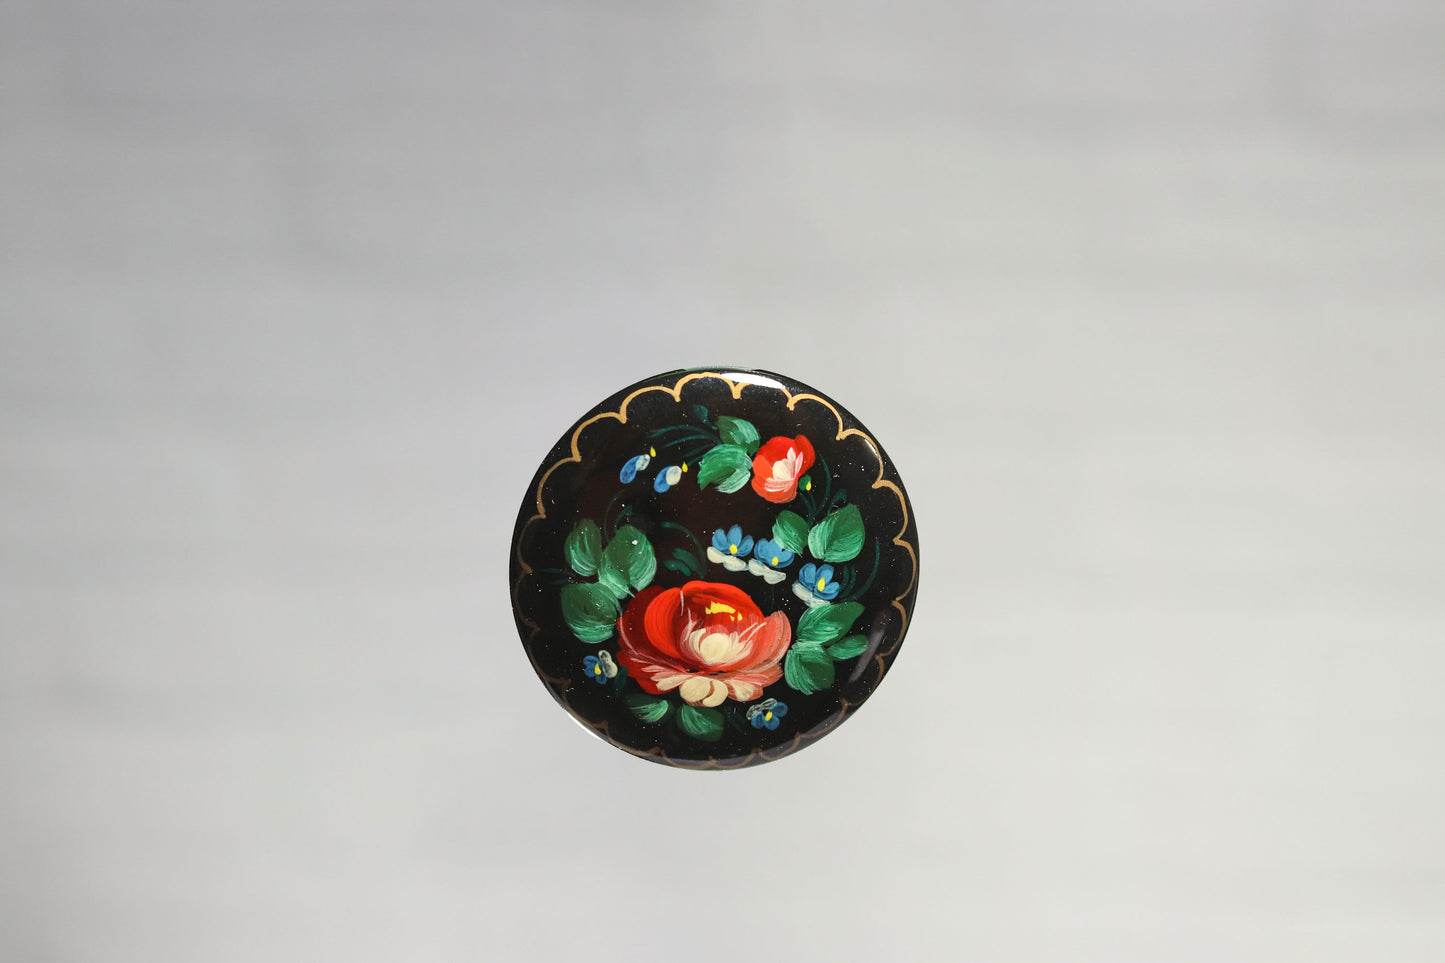 Brooch #06 Red Flower Surrounded by Greenery Flower Handcrafted in Ukraine